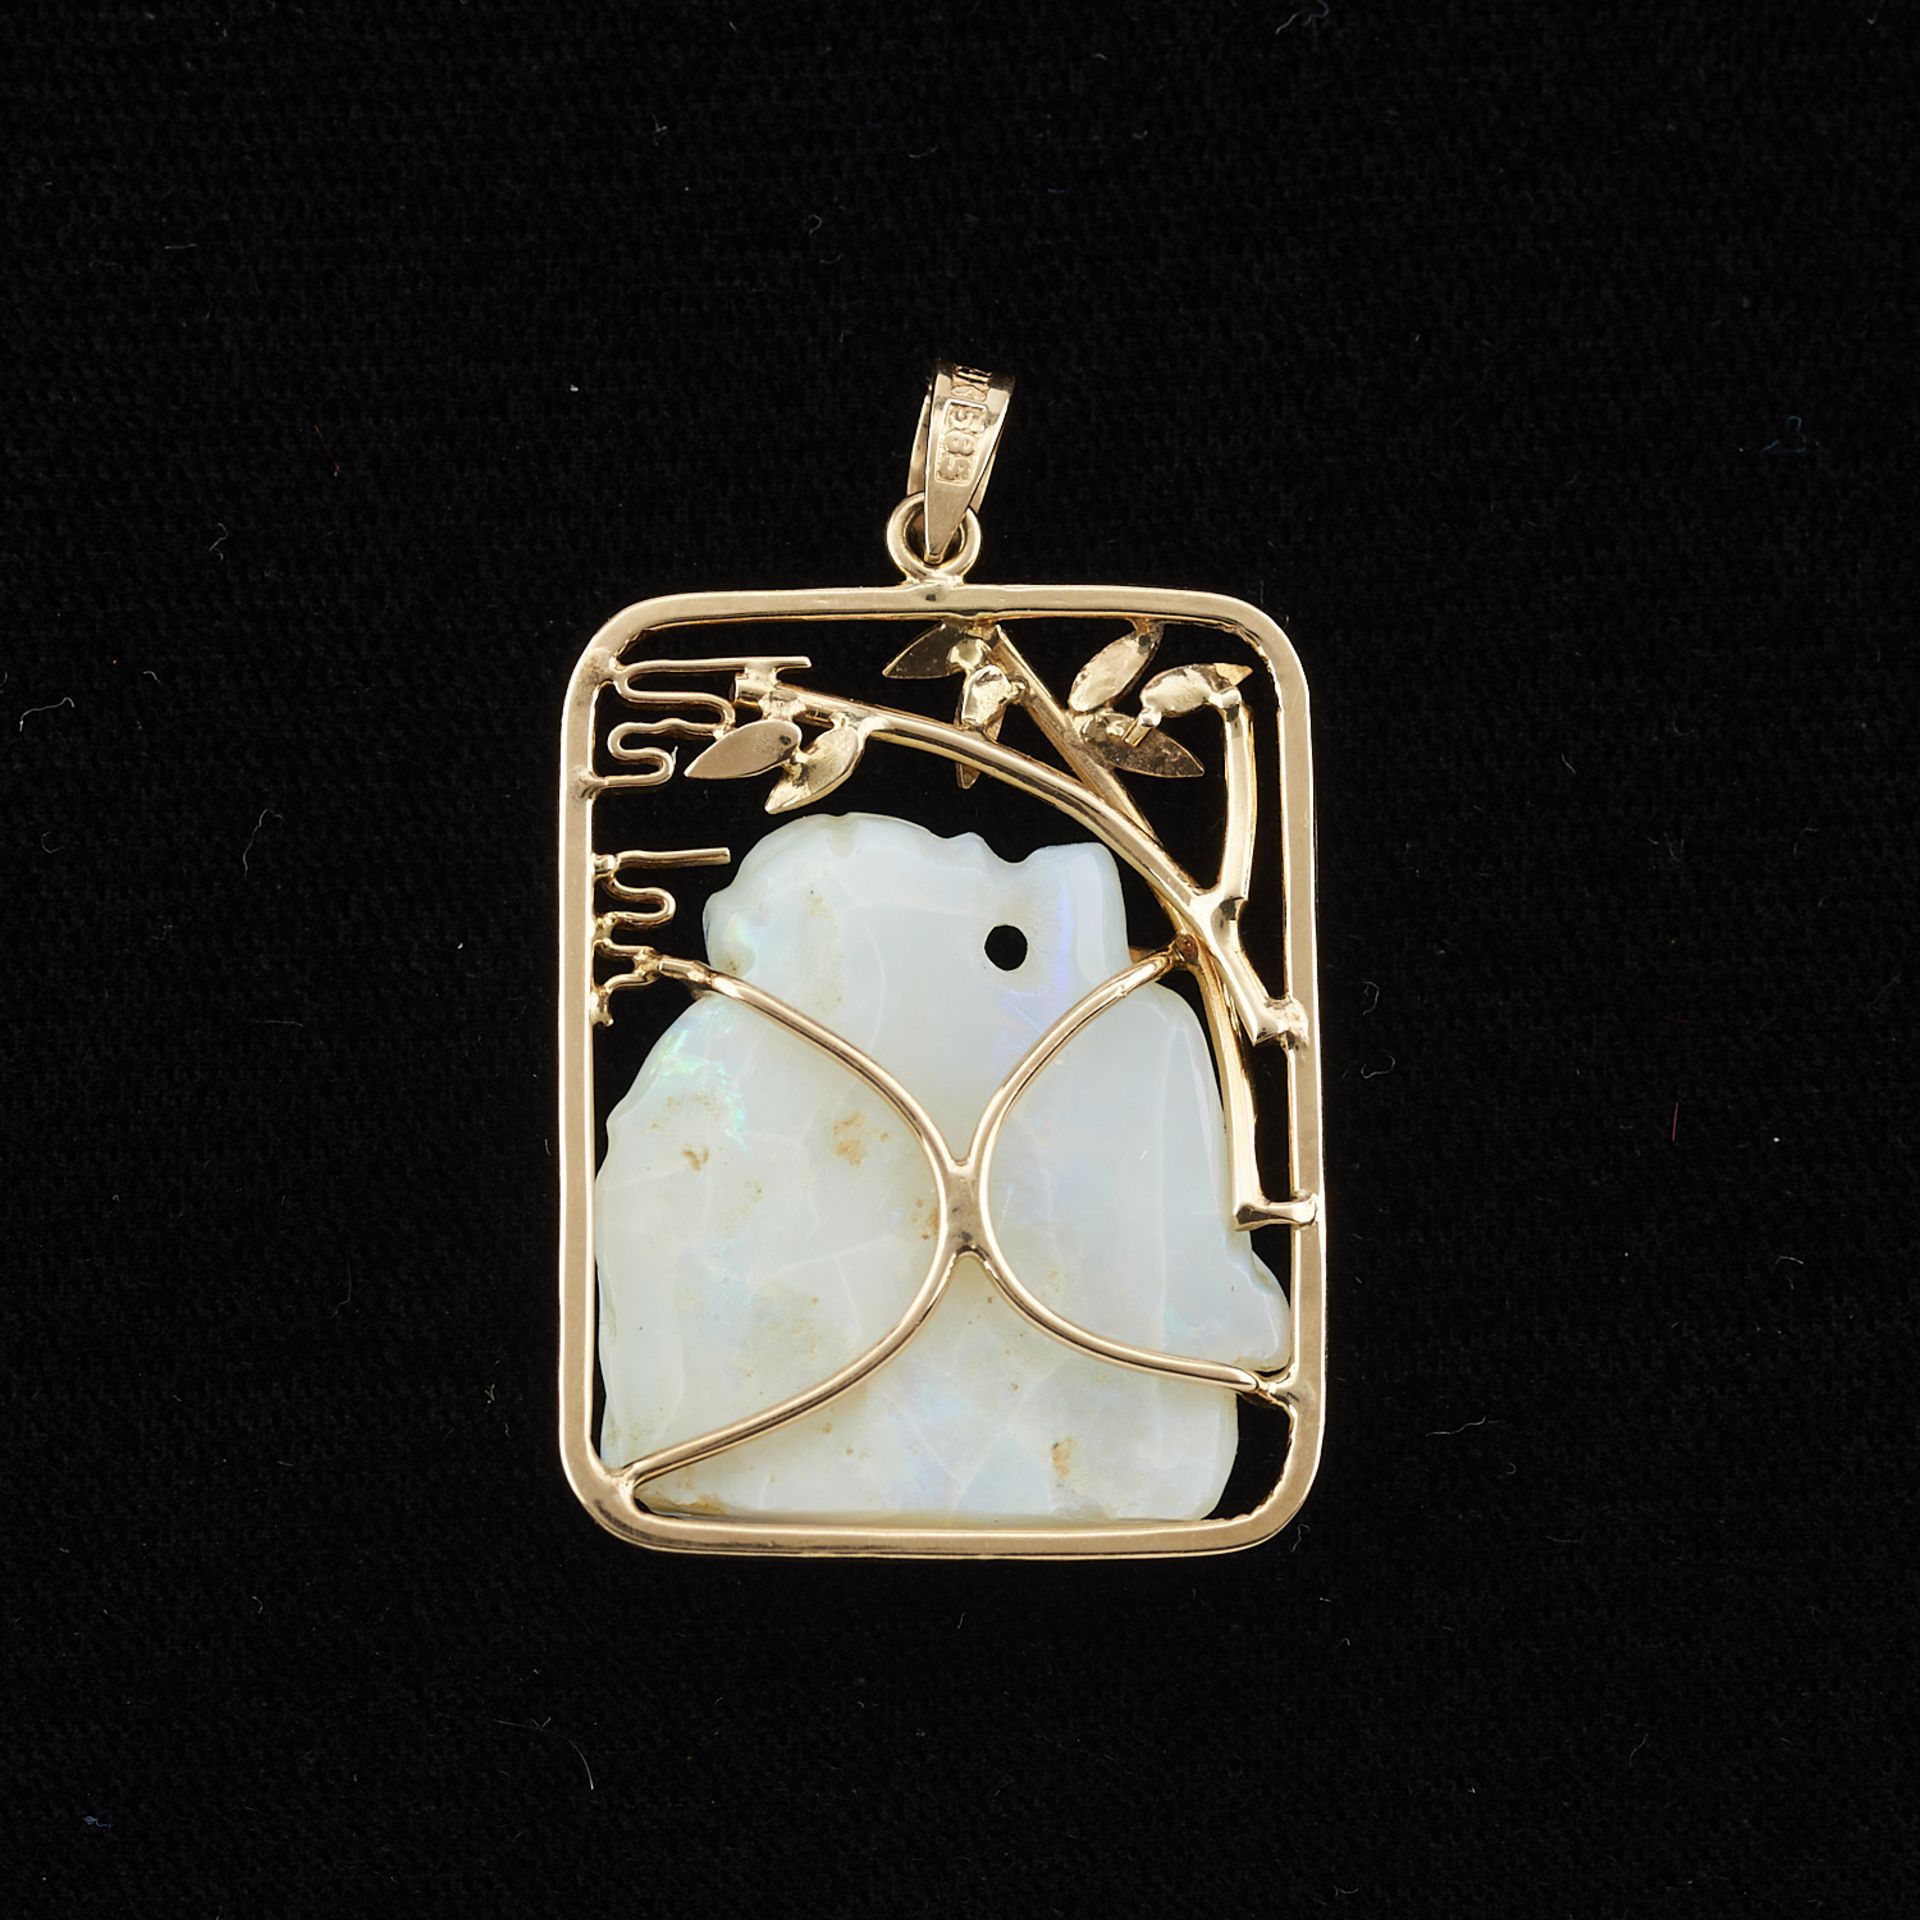 14k Yellow Gold Pendant w/ Carved Opal Buddha - Image 4 of 6